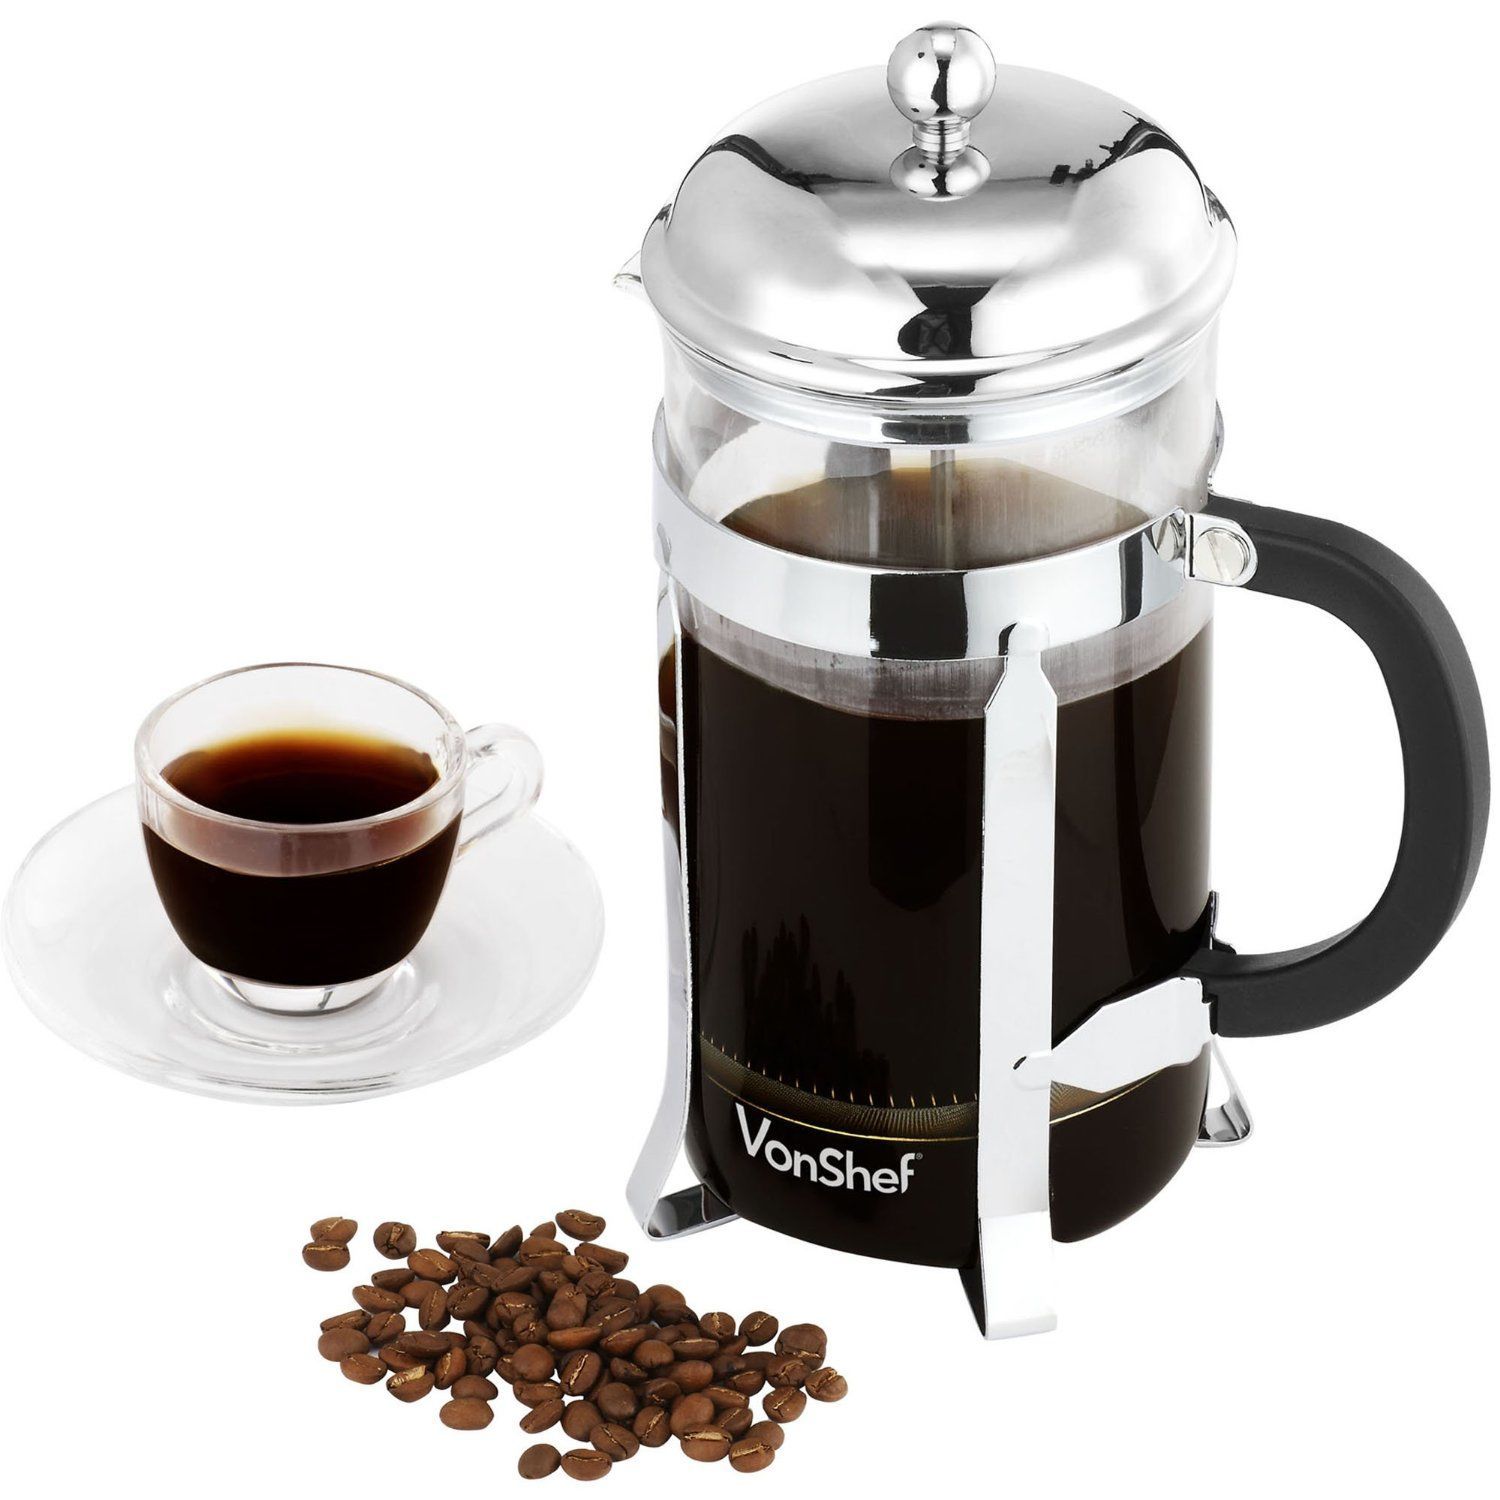 VonShef 8 Glass French Press Cafetiere Coffee Maker